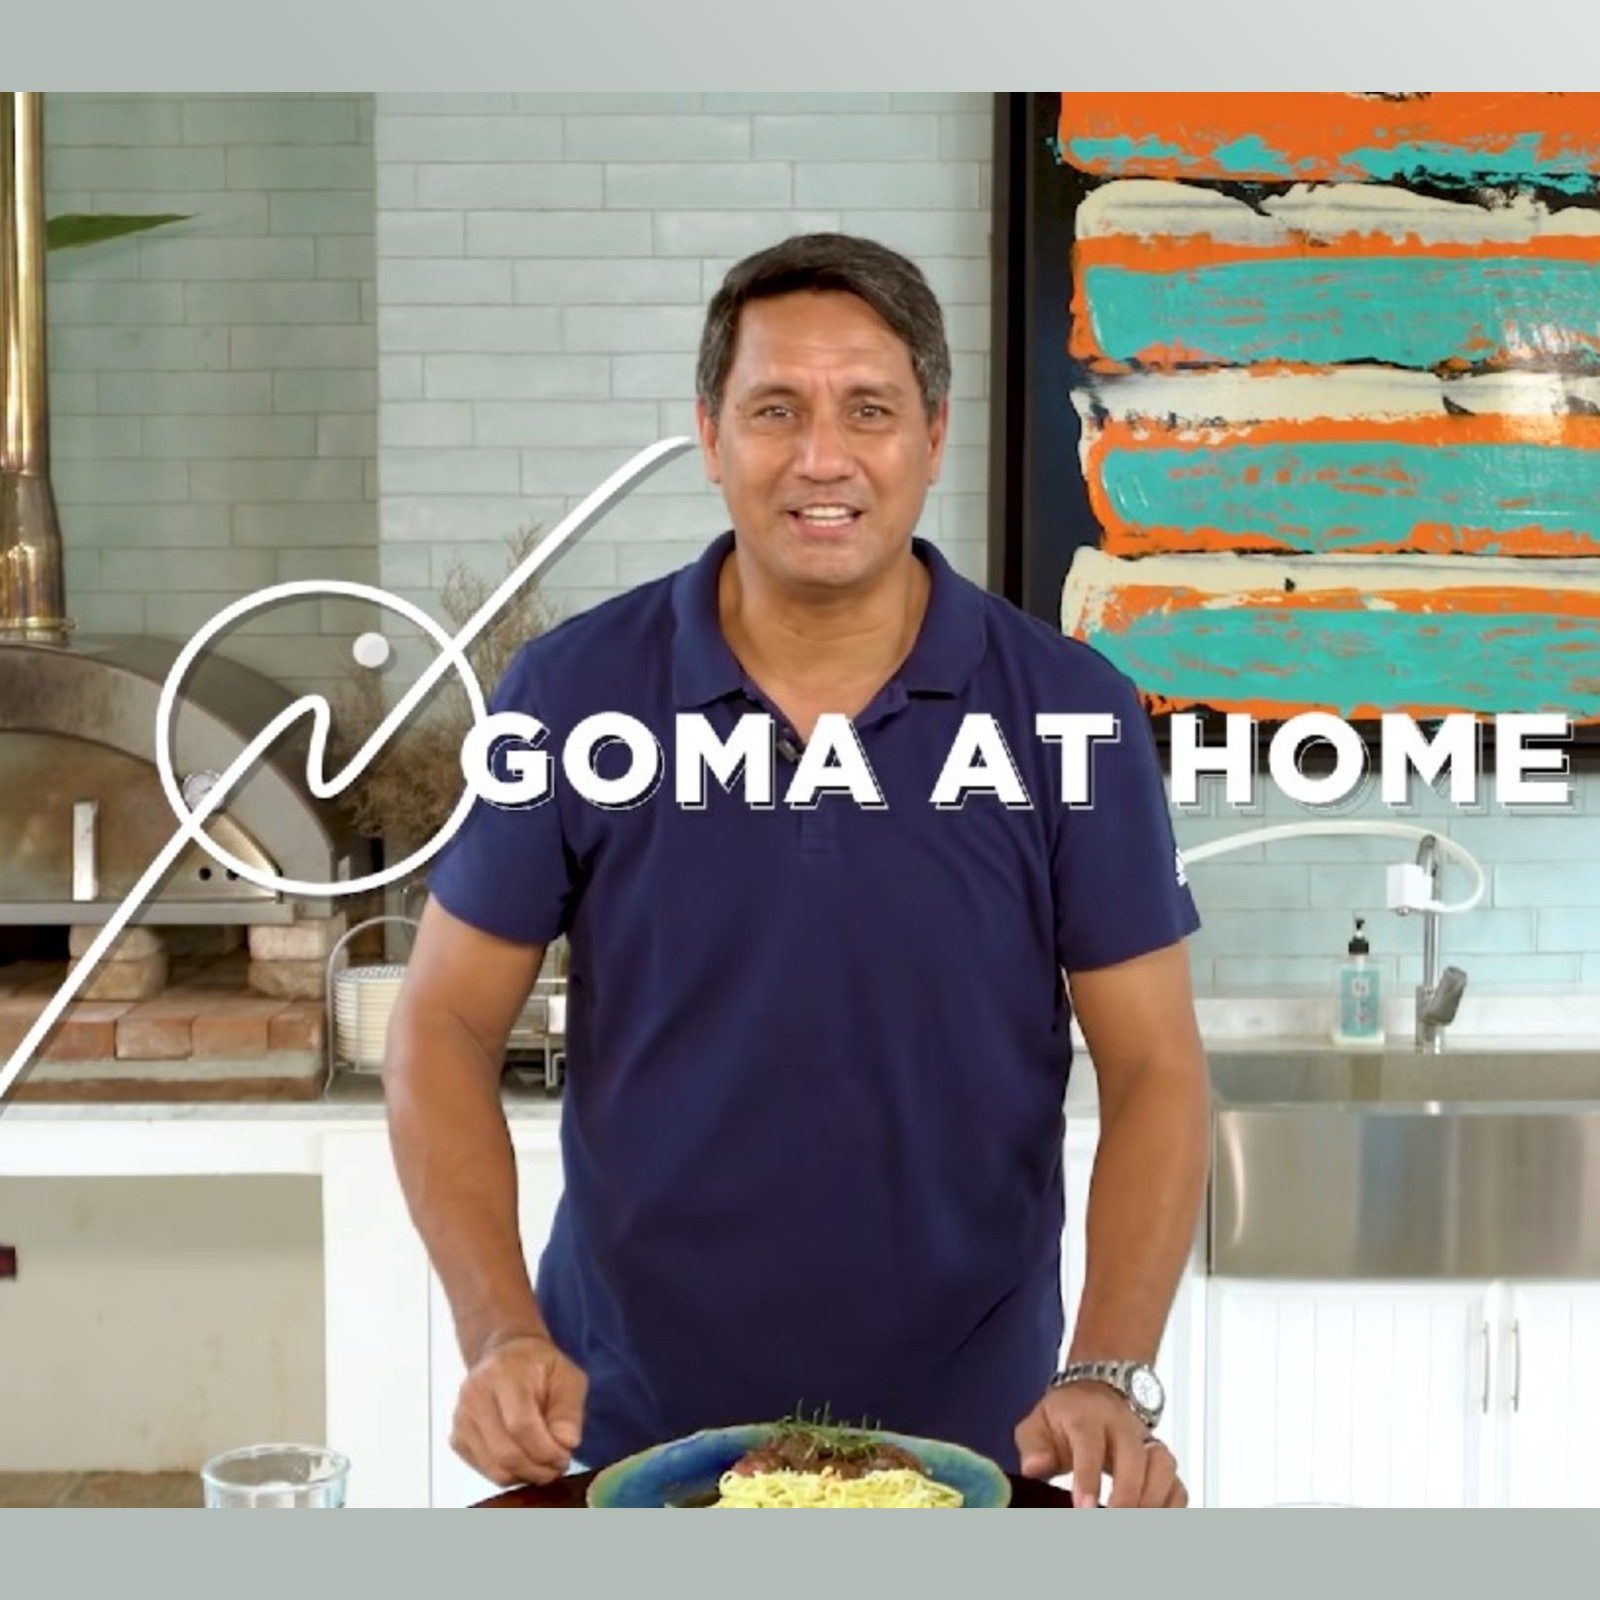 5 recipes by Richard Gomez you should try